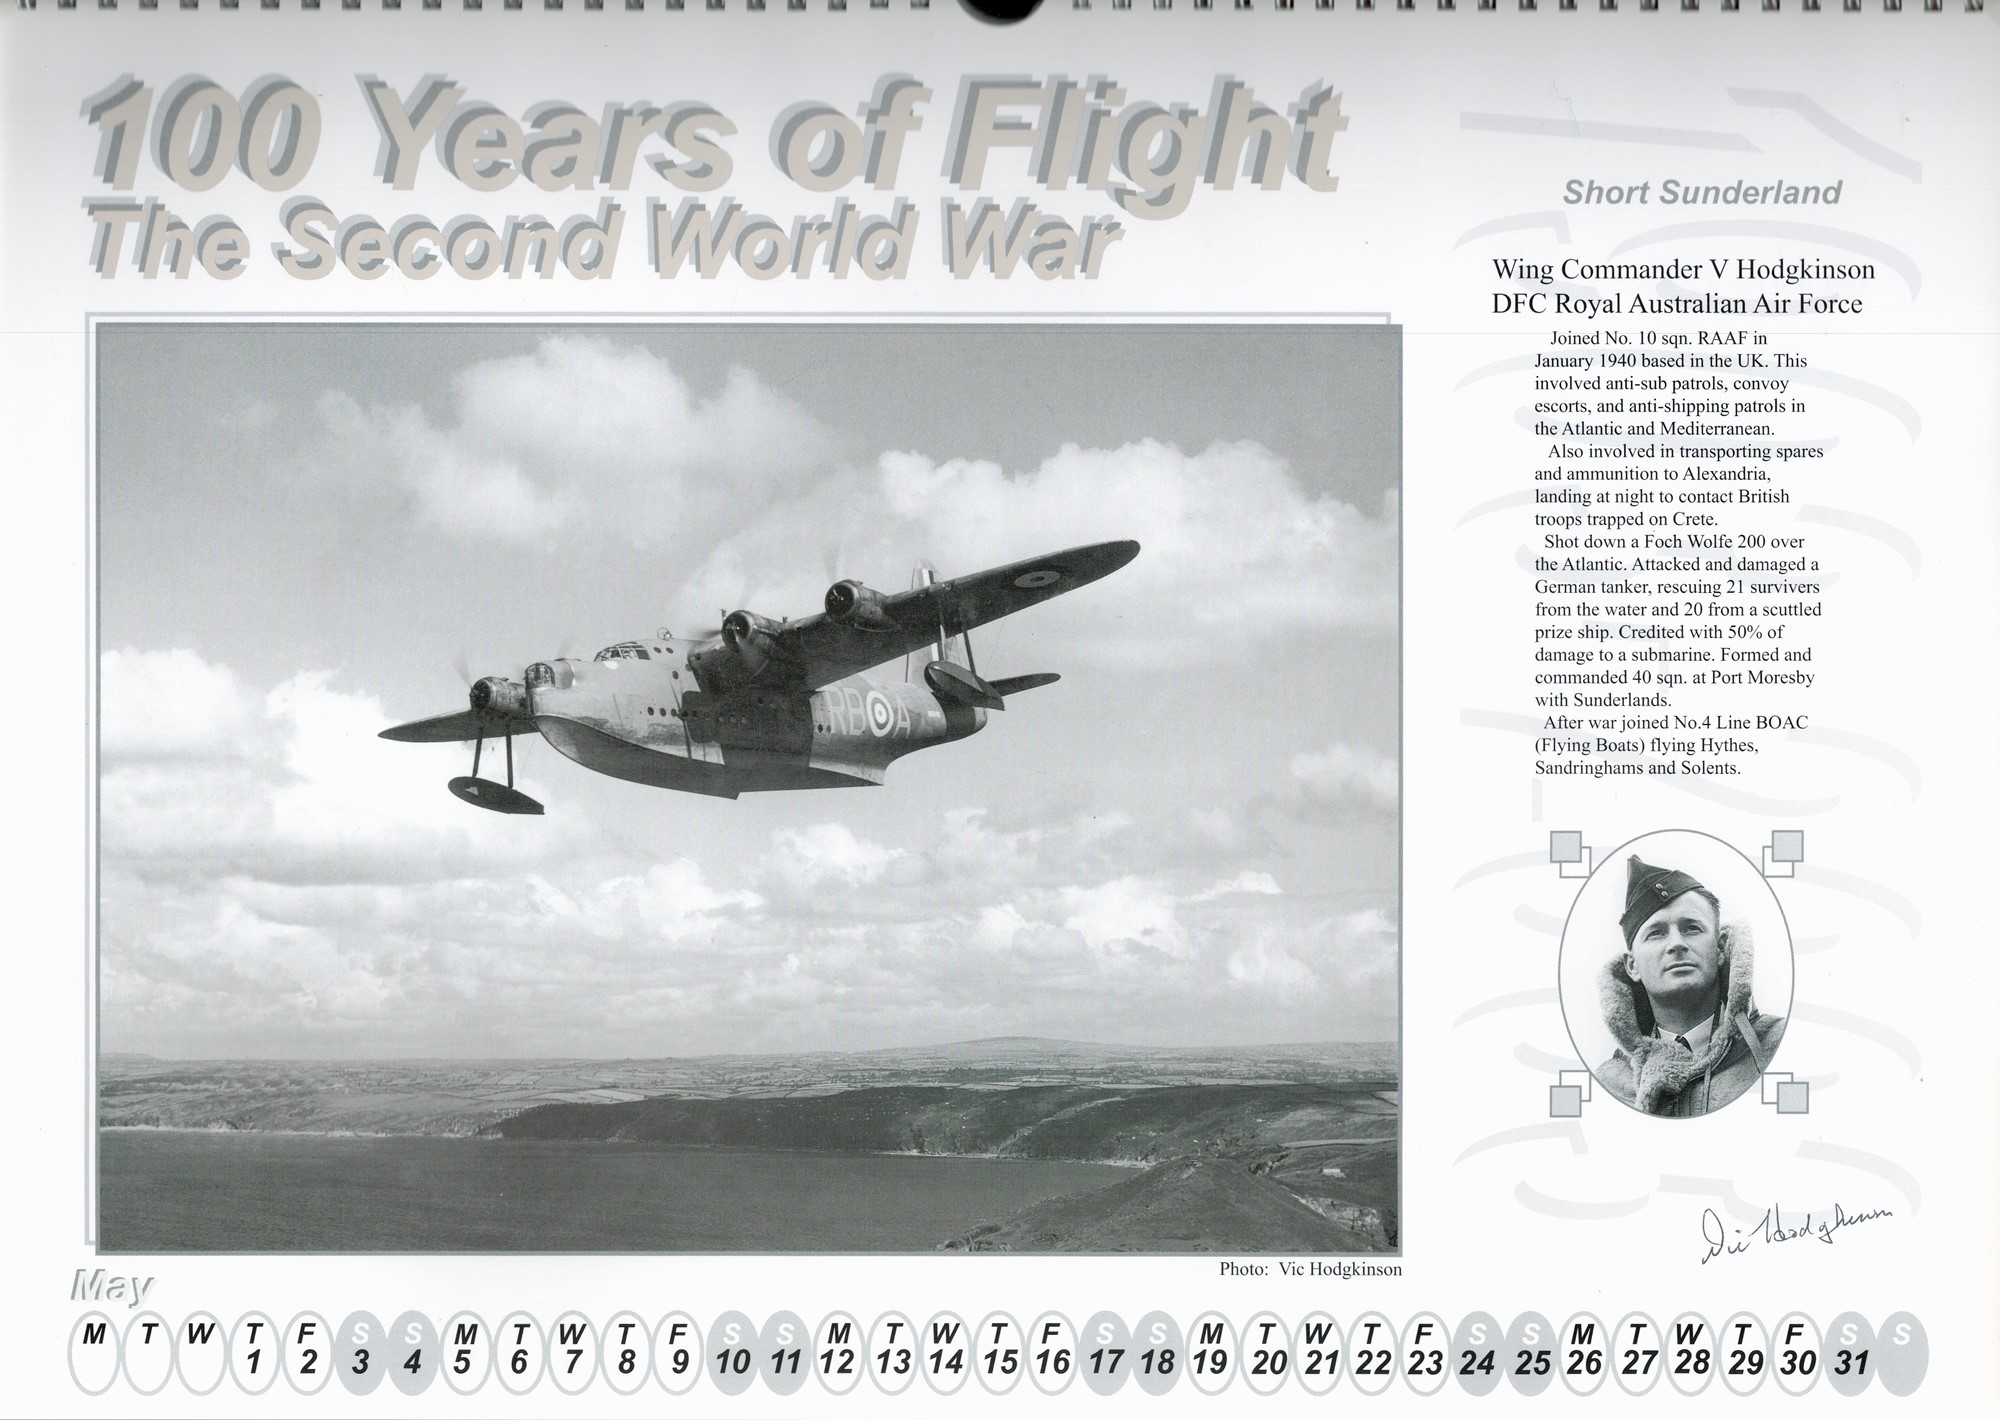 Multi Signed 100 Years of Flight Calendar, Limited Edition, Superb Signatures. Personally Signed - Image 4 of 4